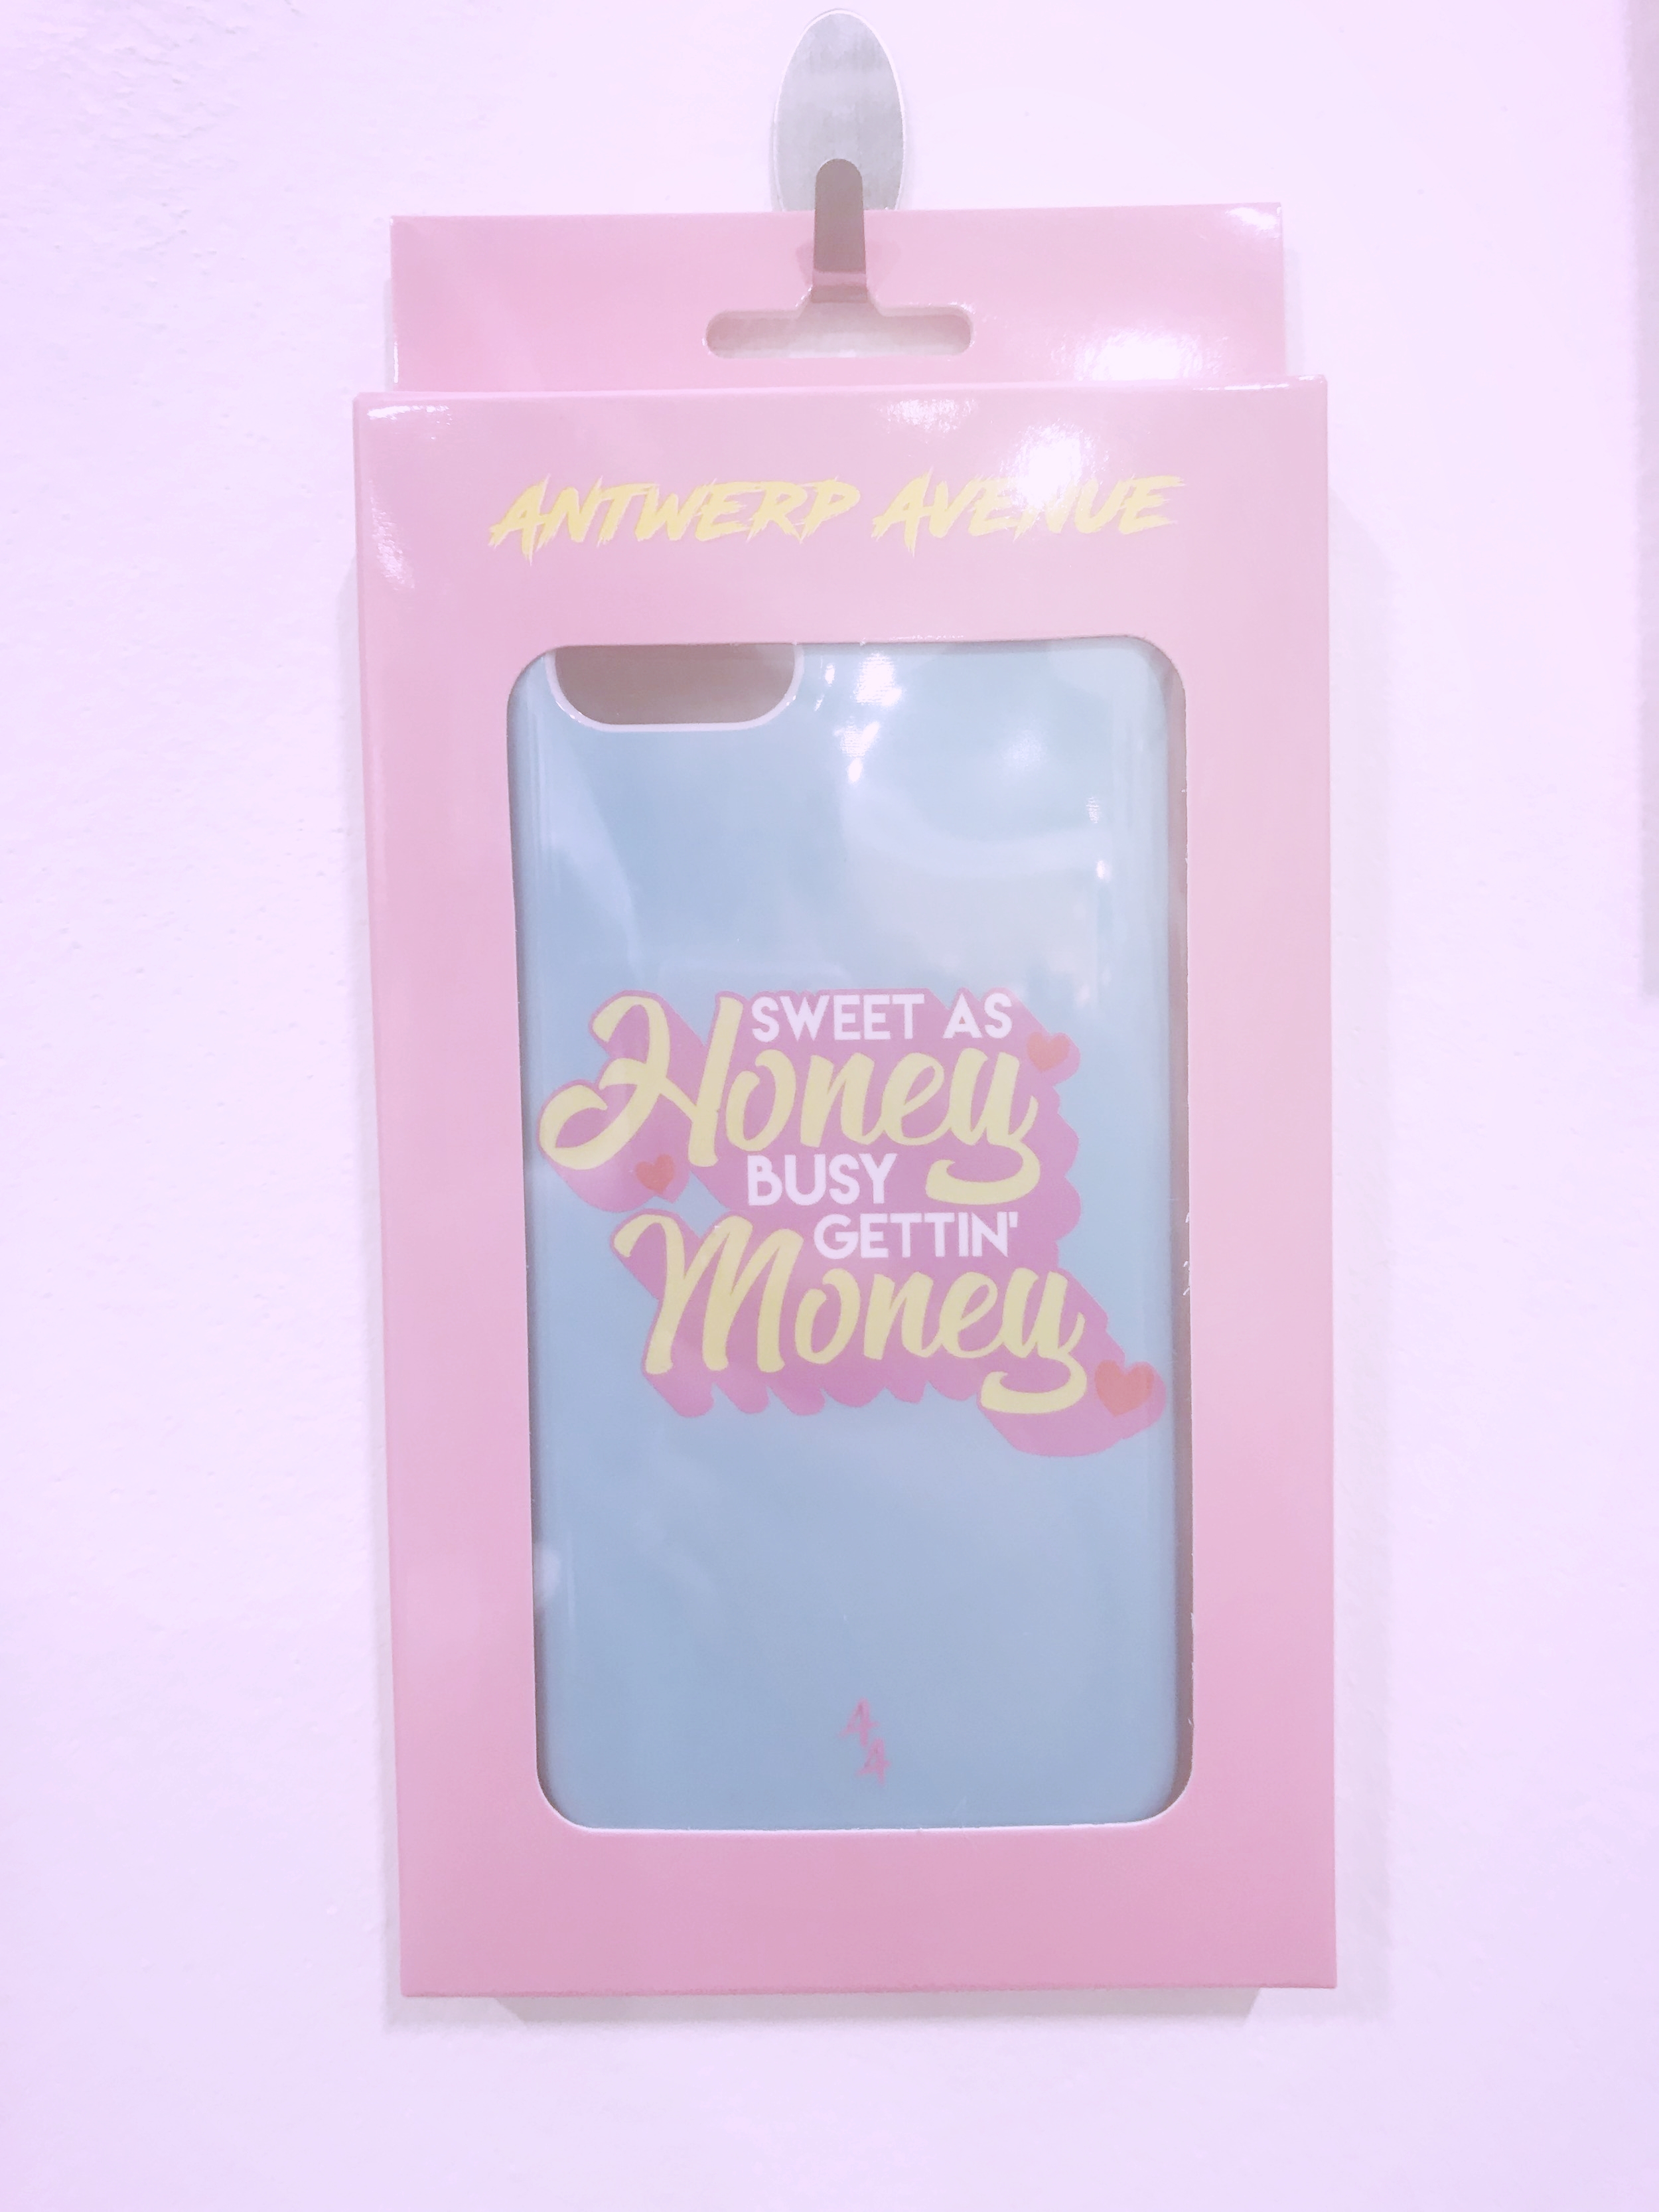 This bad boy phone case is from the Money Moves collection